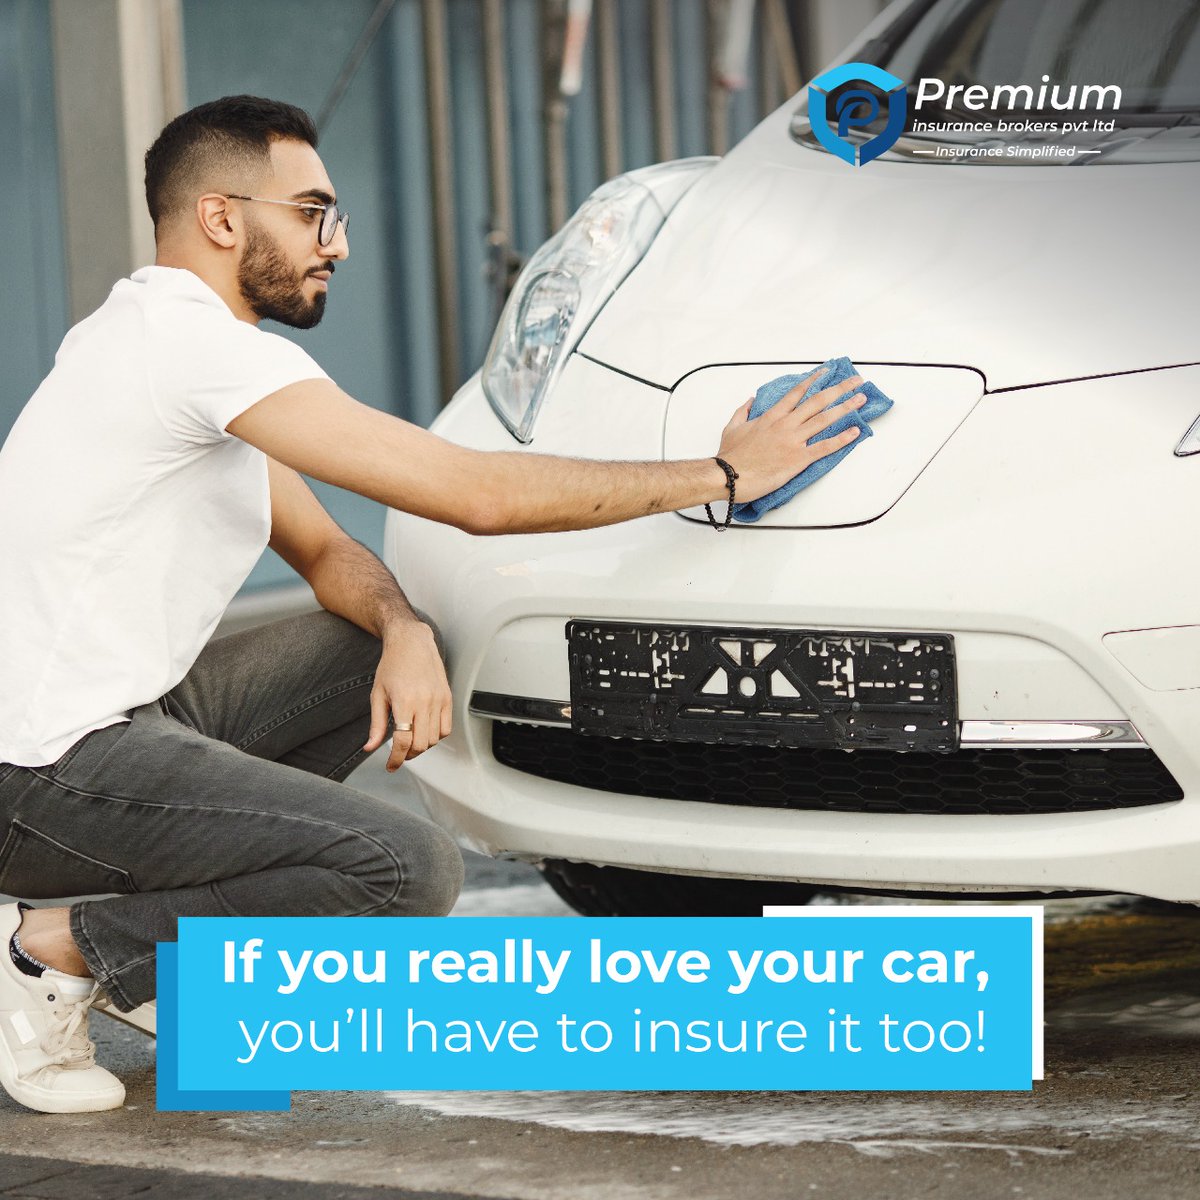 Accidents don’t come with a warning. It’s always better to opt for insurance before the worse happens.

#premiuminsurance #insurancesimplified #insureyourcar #morethaninsurance #insurance #onlineinsurancepolicy #lifeinsurance #insuranceagent #healthinsurance